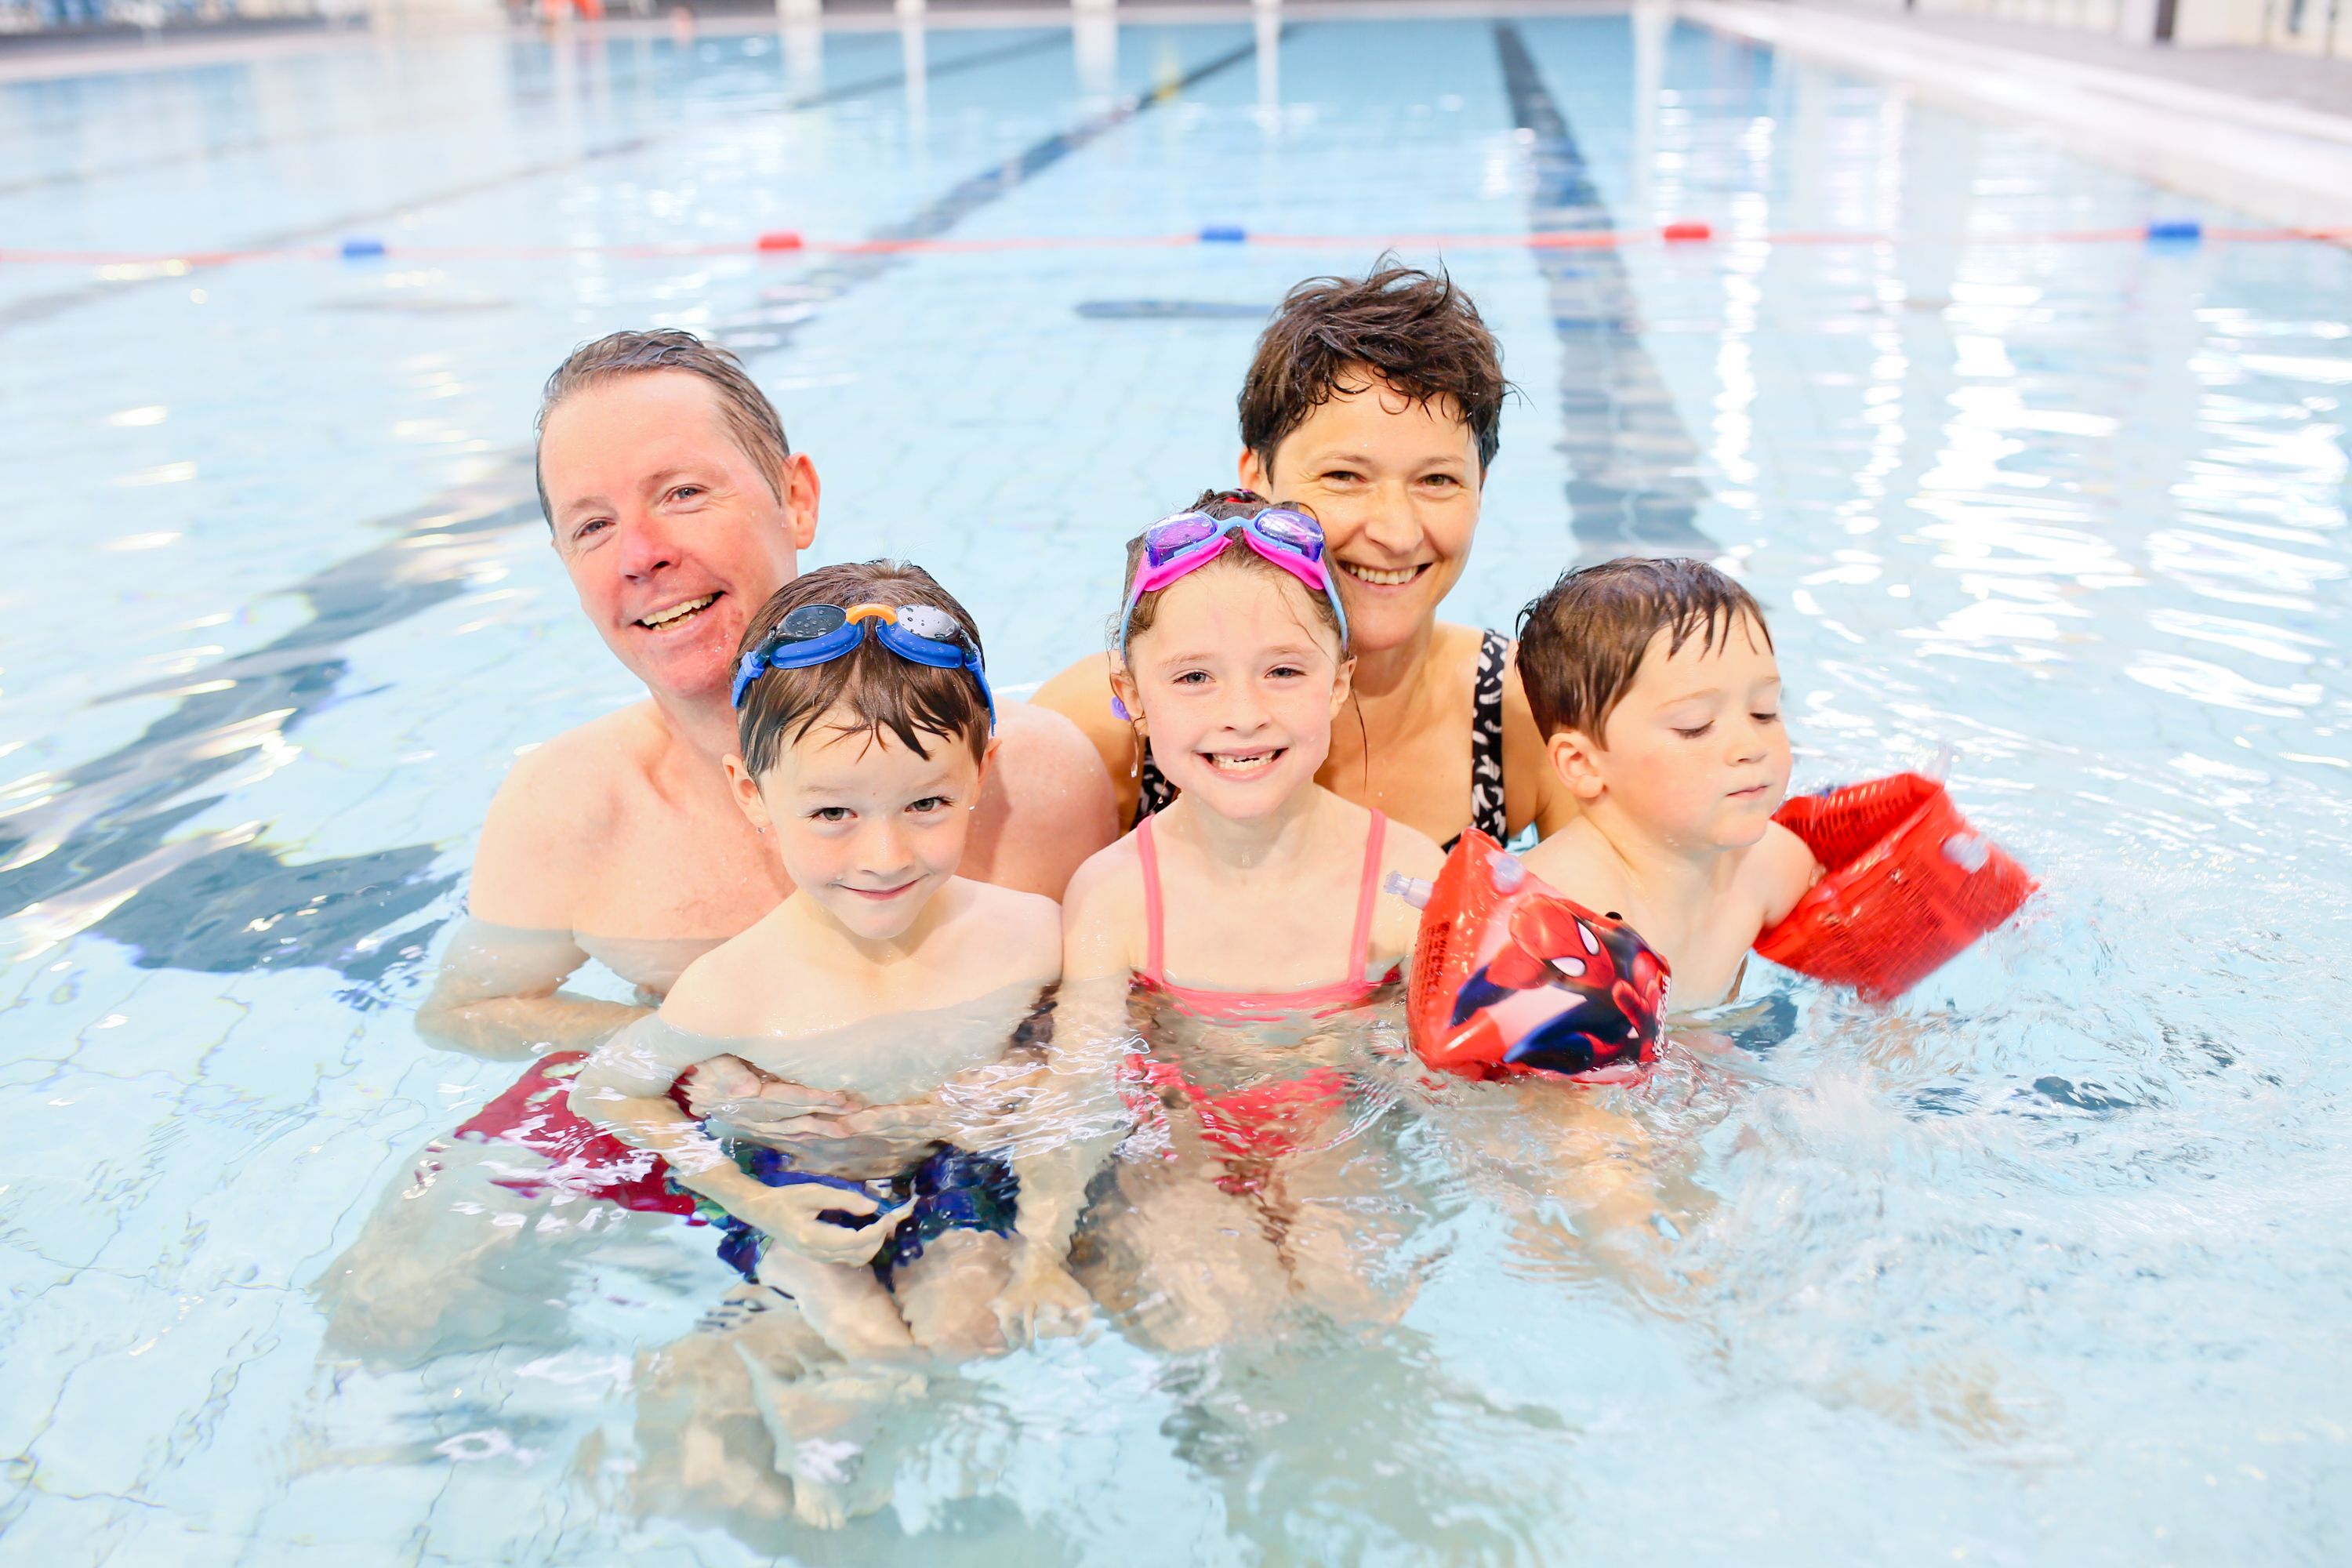 SWIMMINGLY: Free family activities will take place at the Andersonstown Leisure Centre this weekend